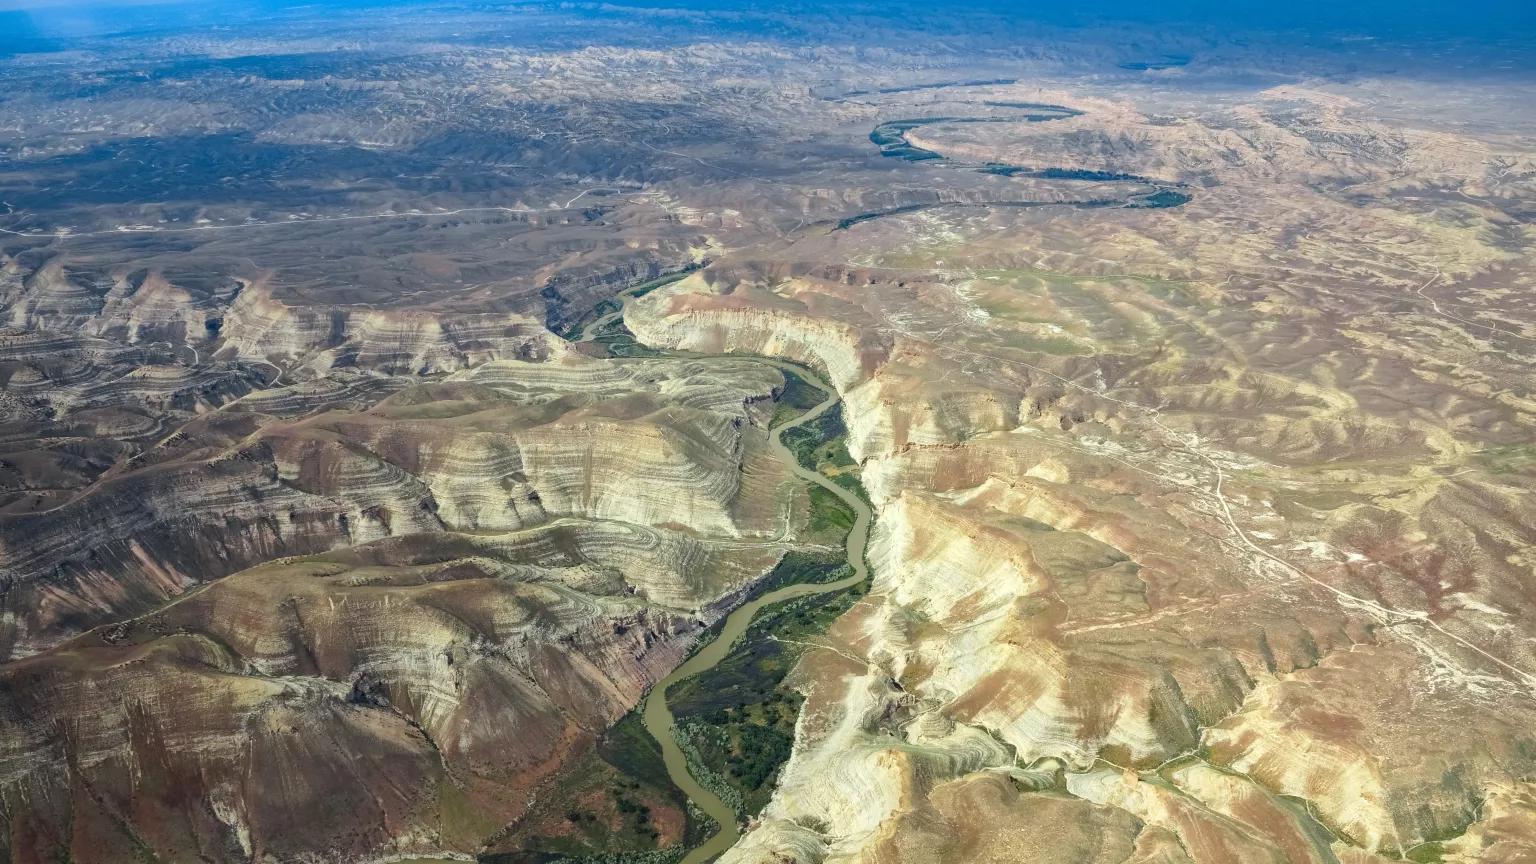 An aerial view of a green valley with a river running through it surrounded by rugged brown mountains